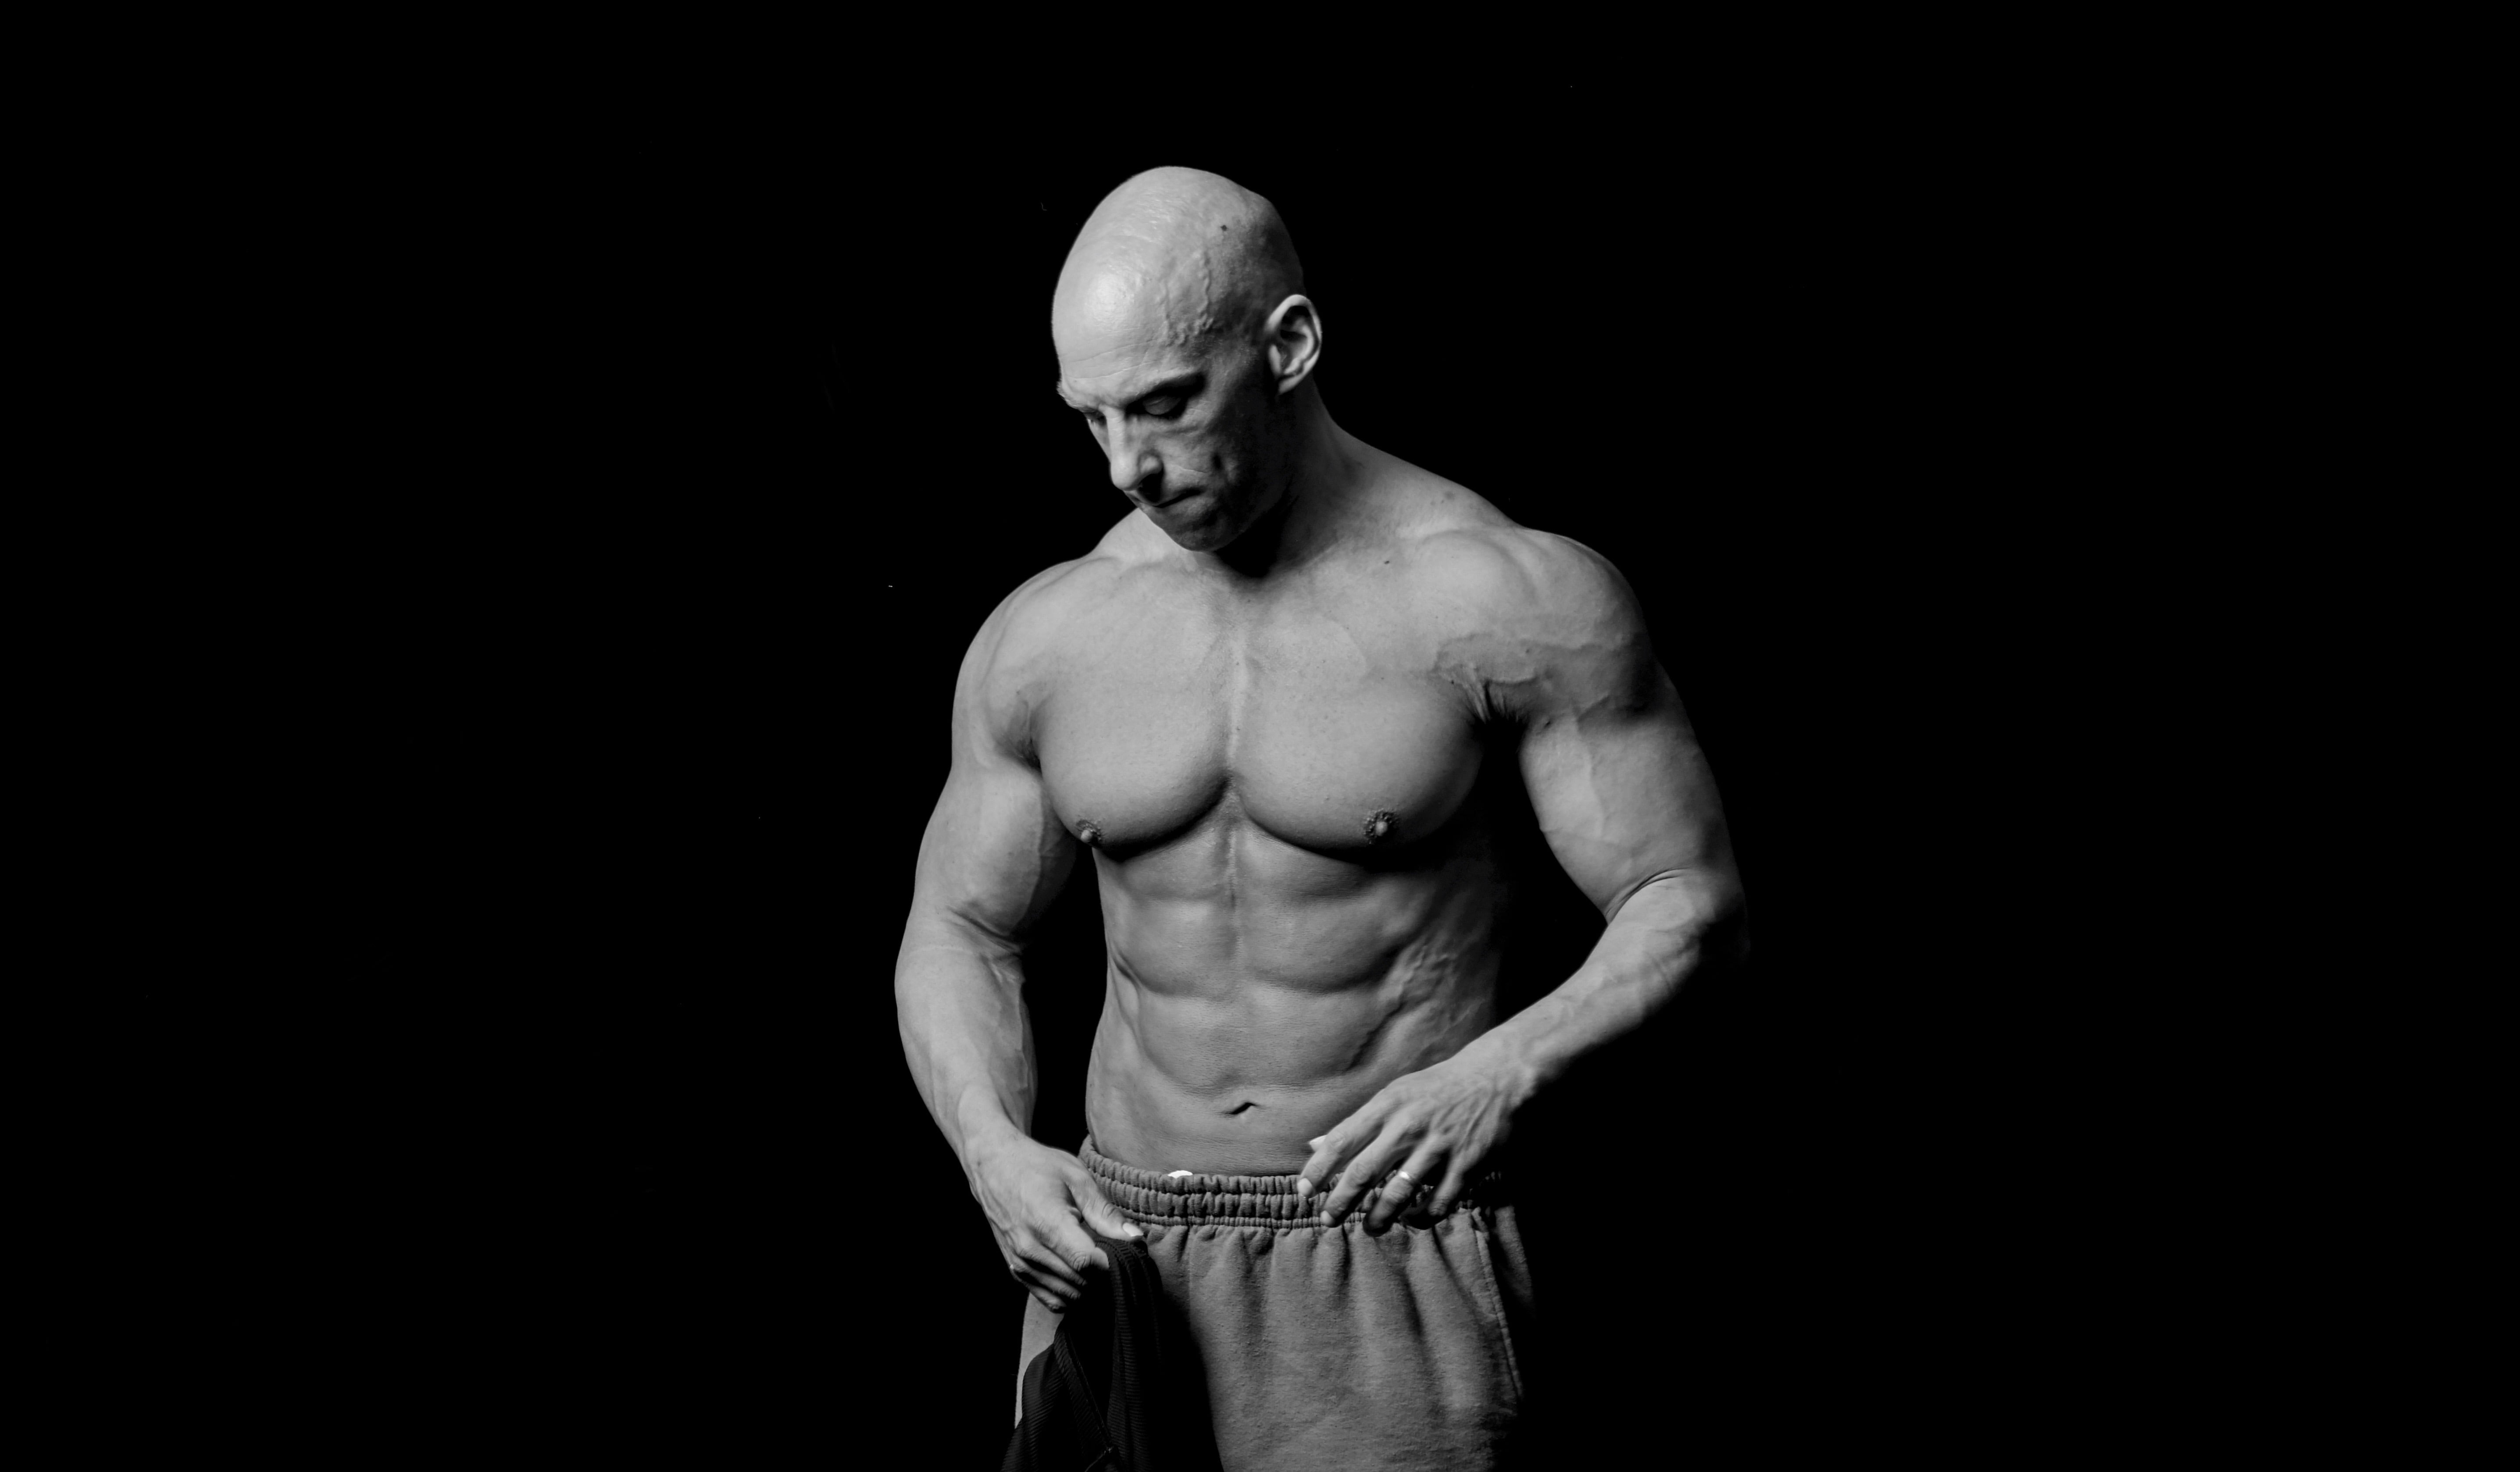 The Jacked Athlete 31 Plan Part 2 – The Overall Plan